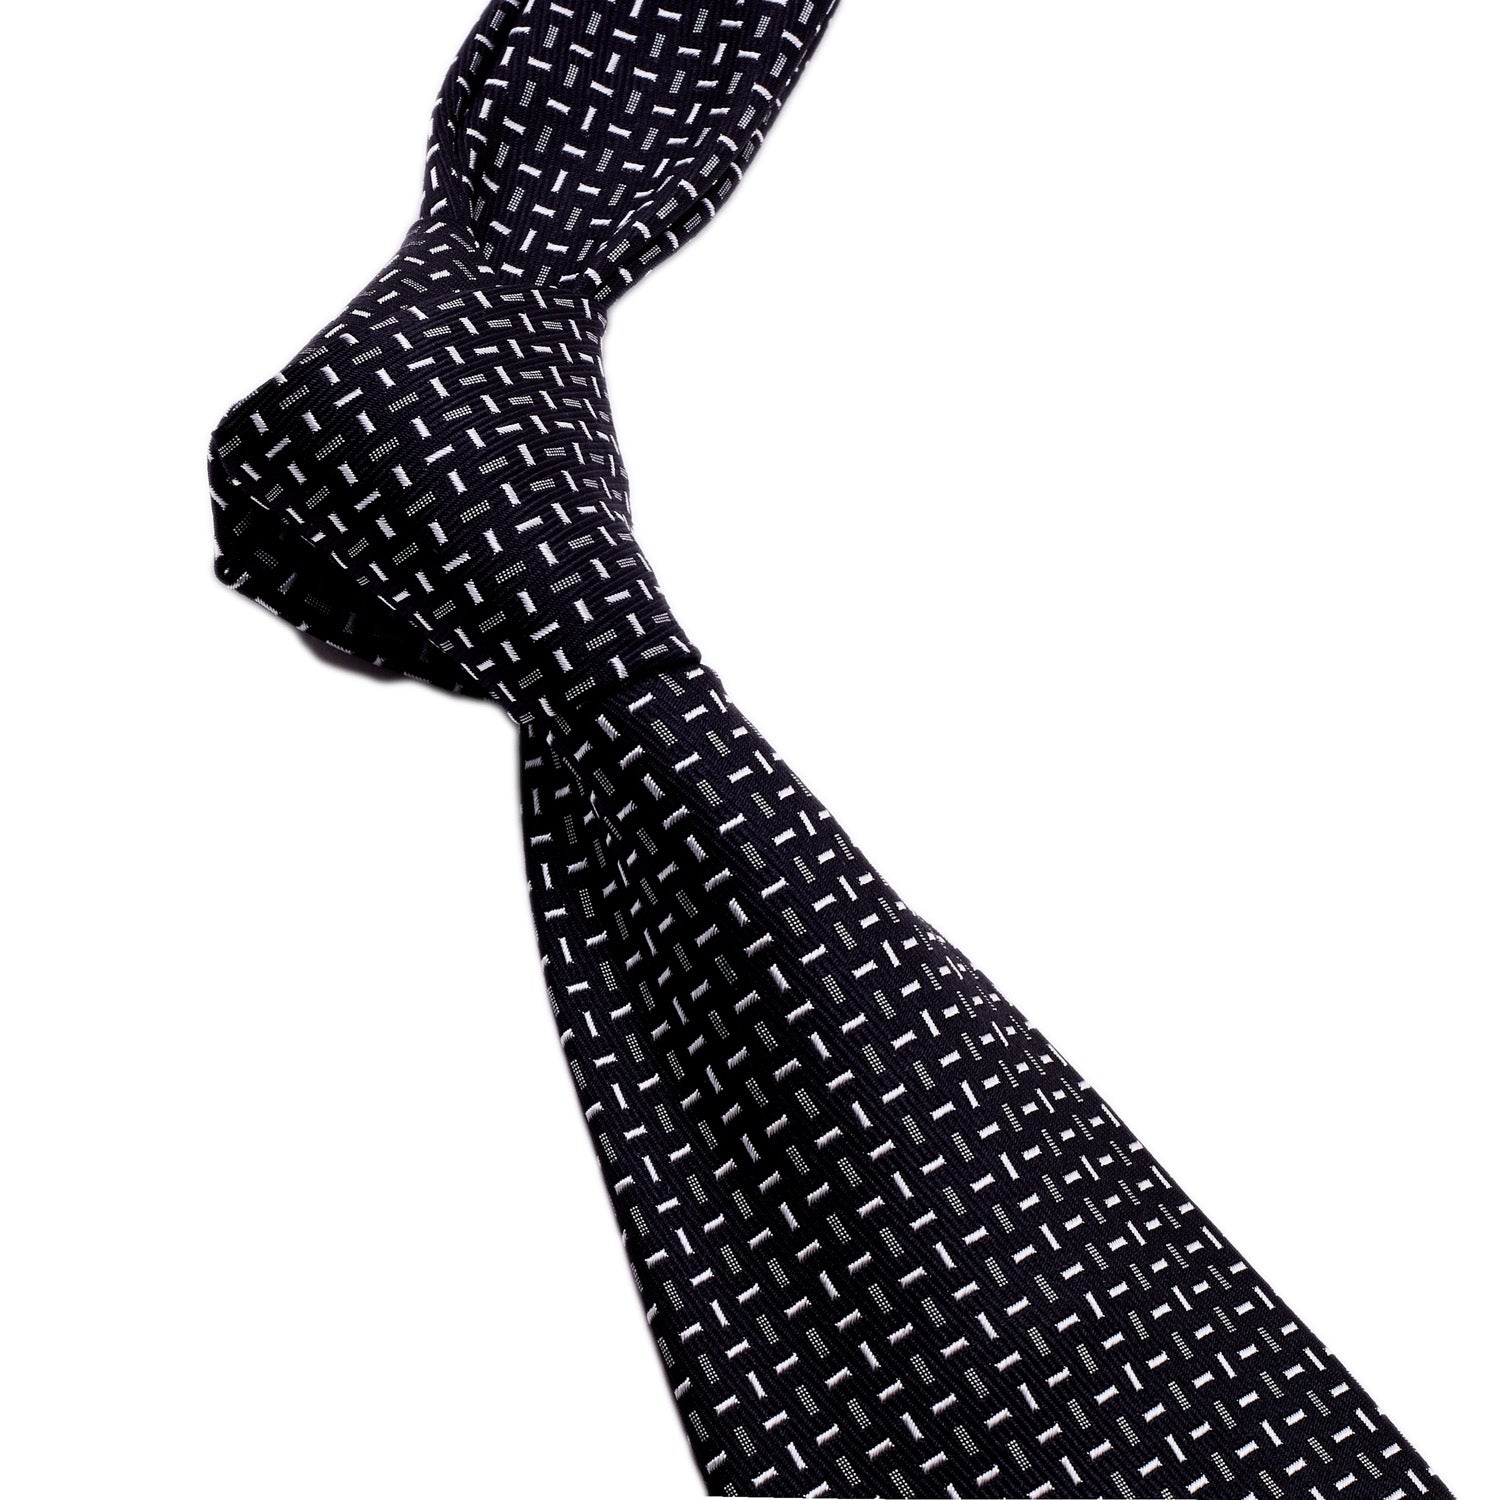 A Sovereign Grade Cross-Bar Jacquard Tie handcrafted in the United Kingdom by KirbyAllison.com.